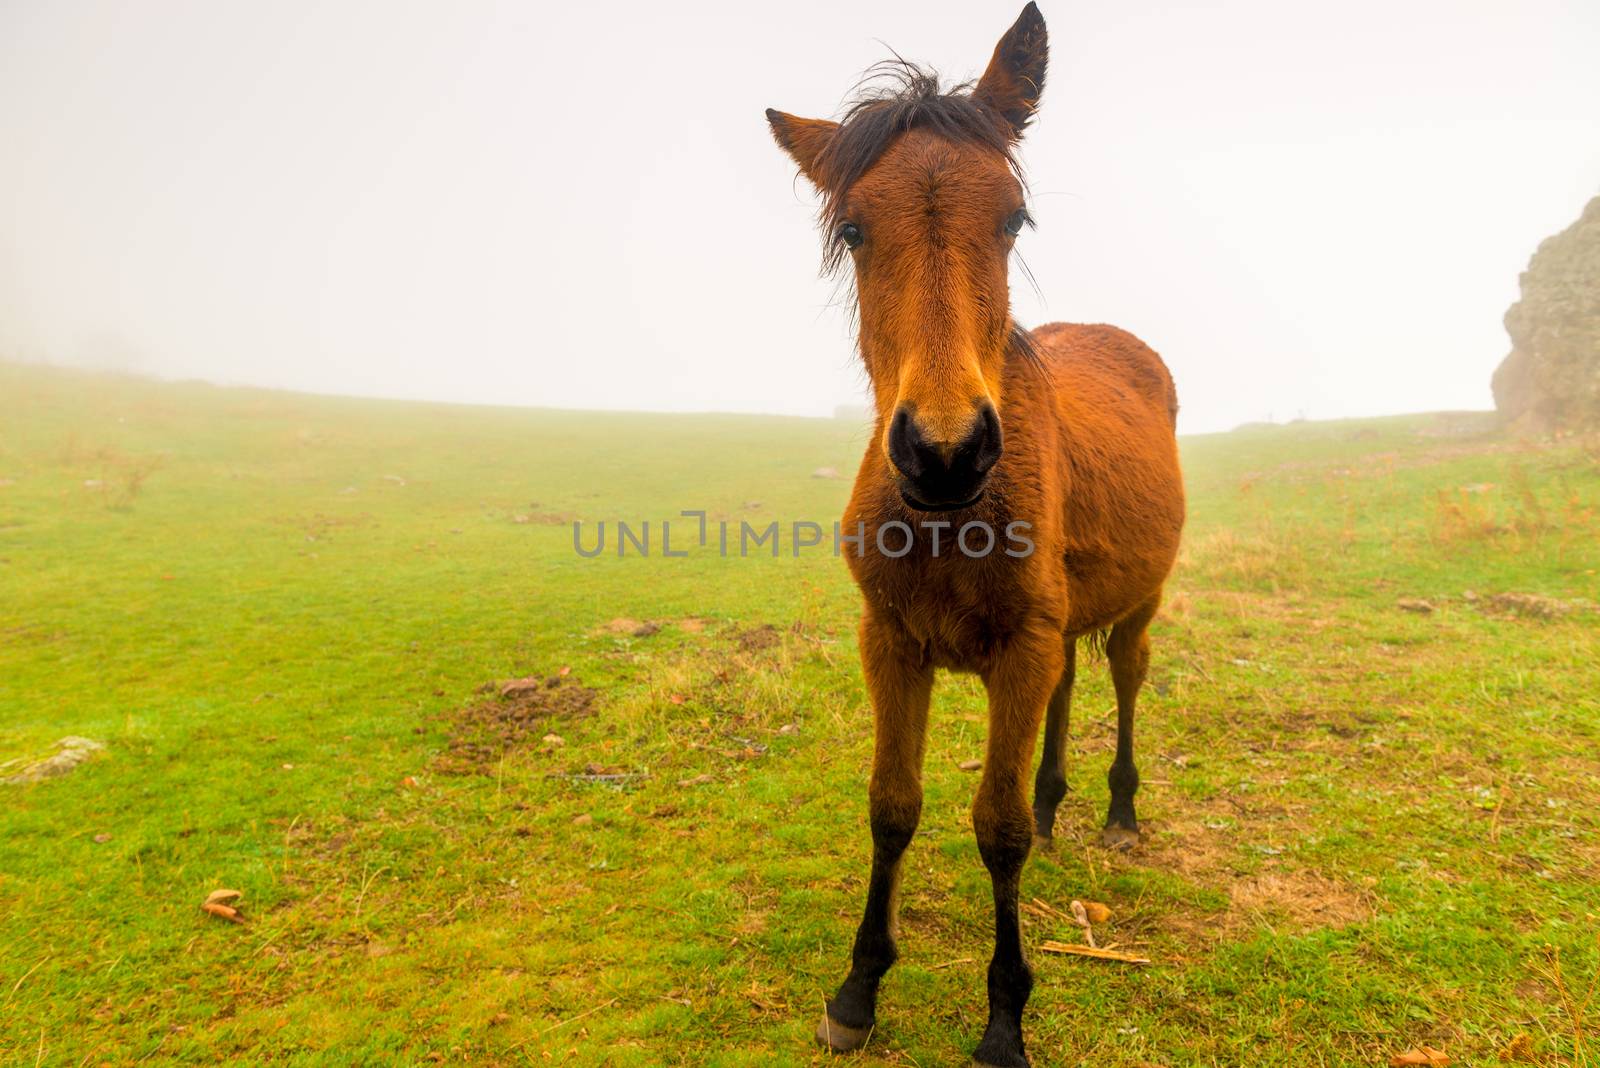 Little brown foal in a foggy day in the field by kosmsos111